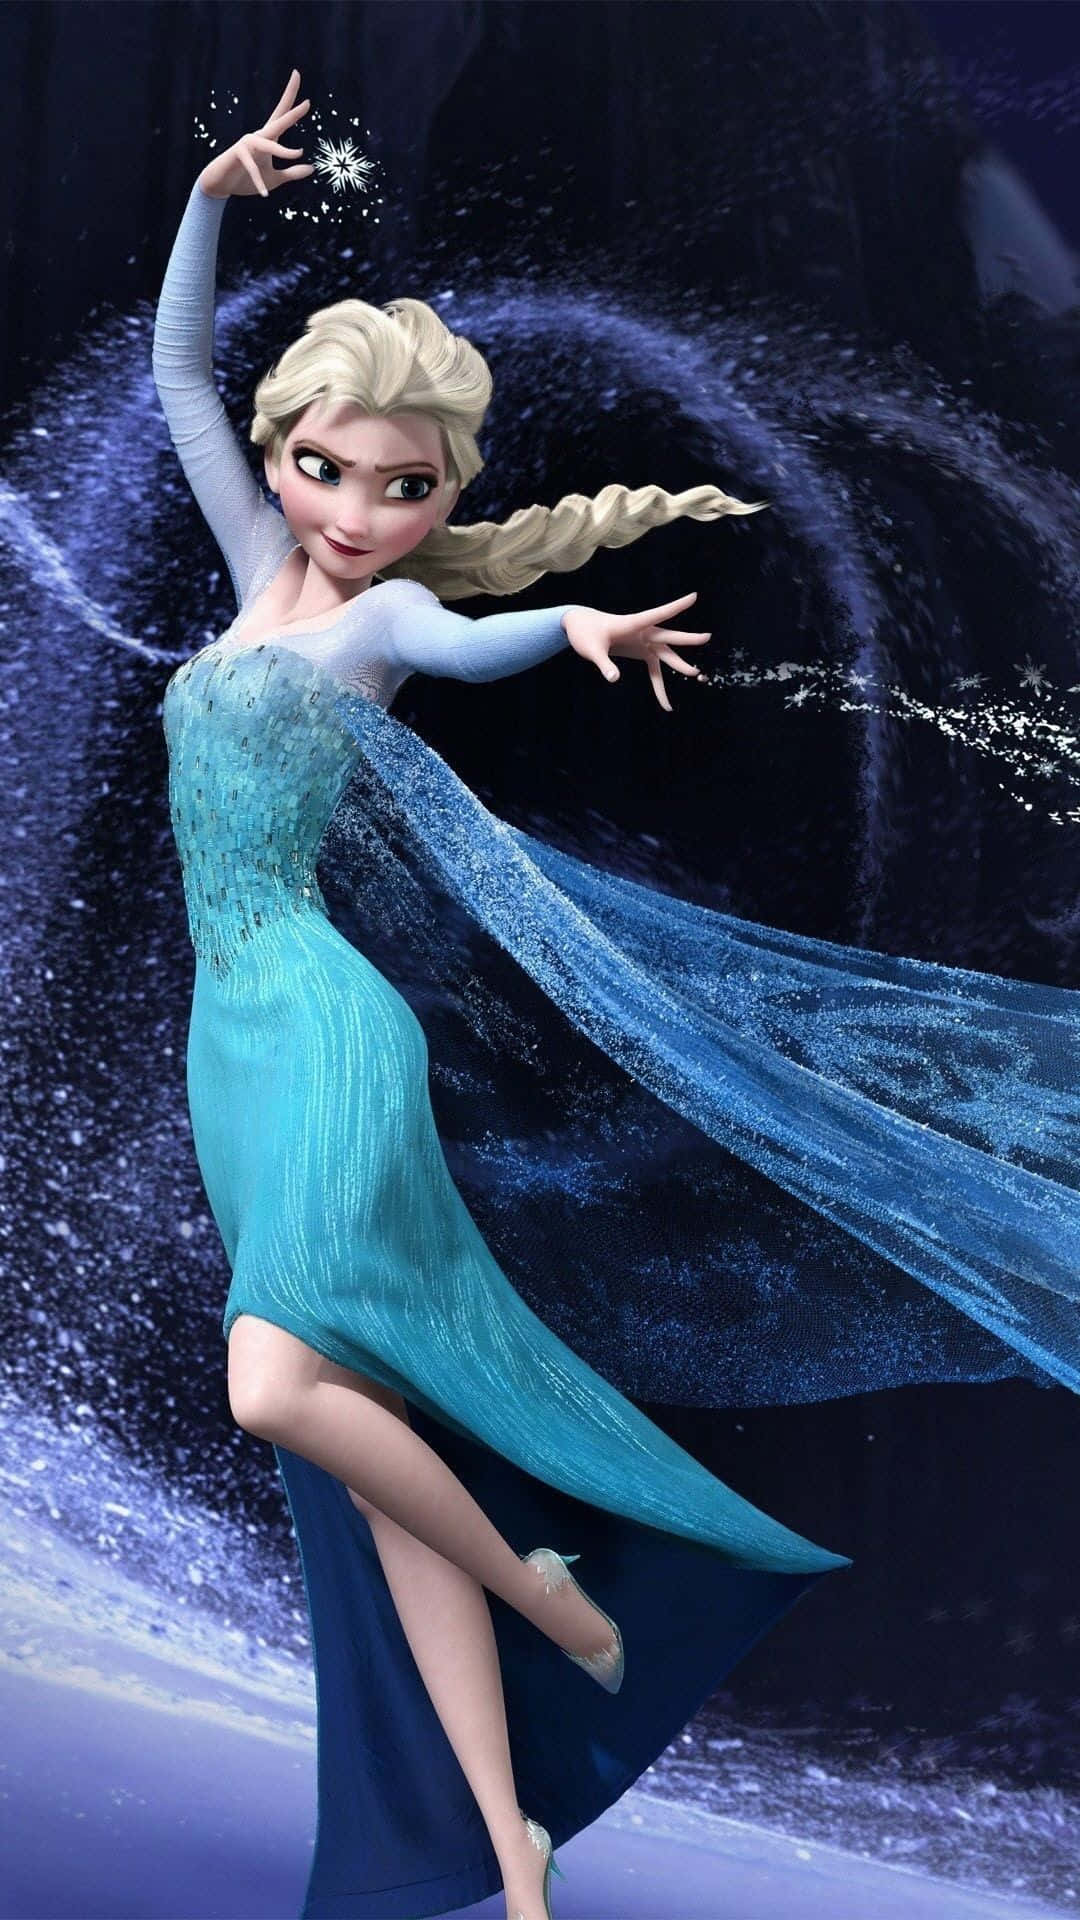 With her icy powers and optimistic outlook, Elsa is an inspiring icon!